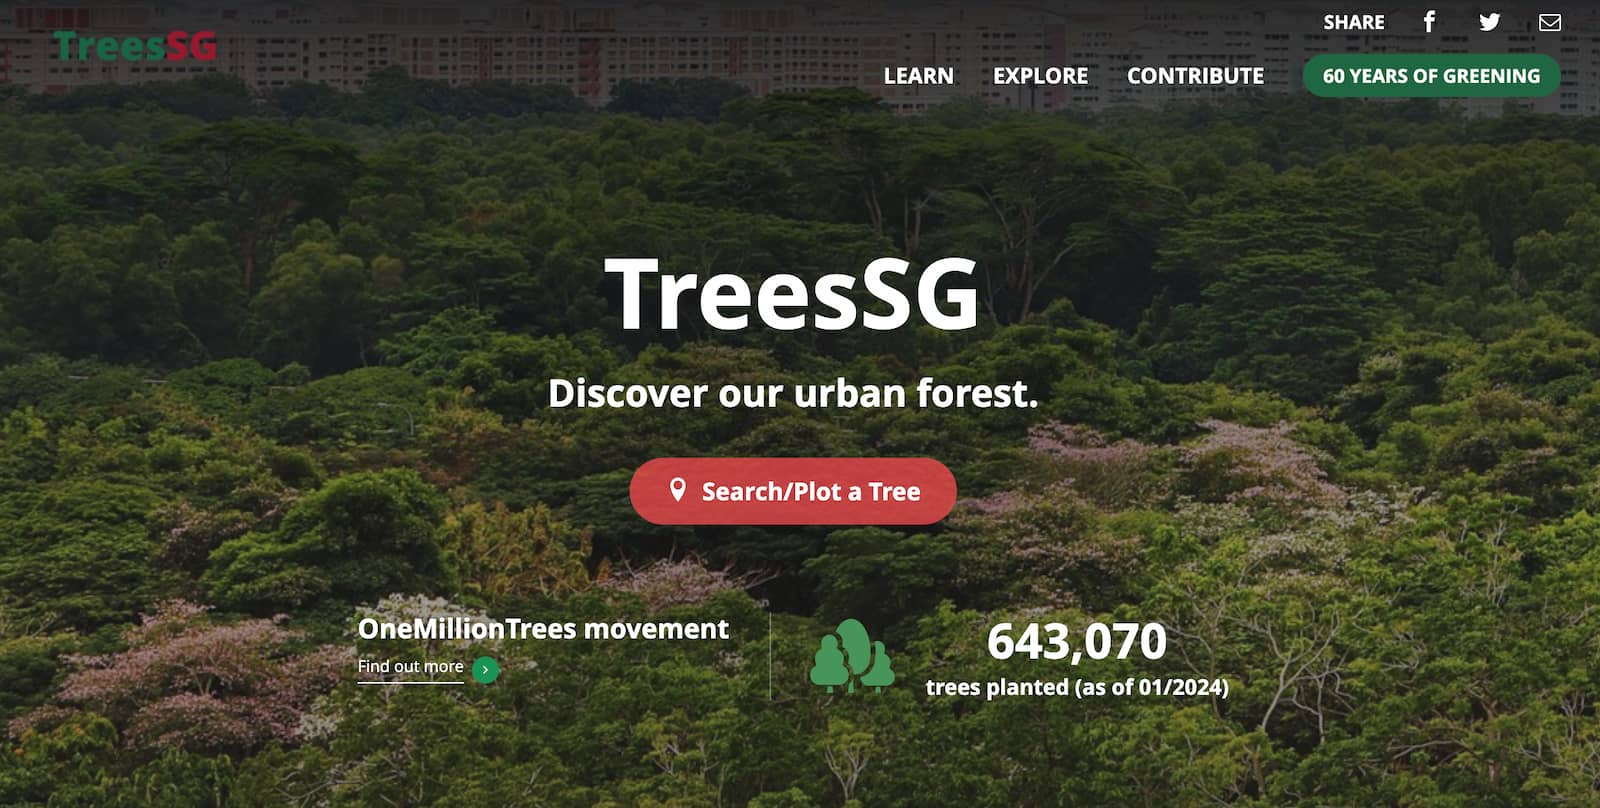 A collaboration between NParks and GovTech, TreesSG offers information on the 6 million trees in Singapore